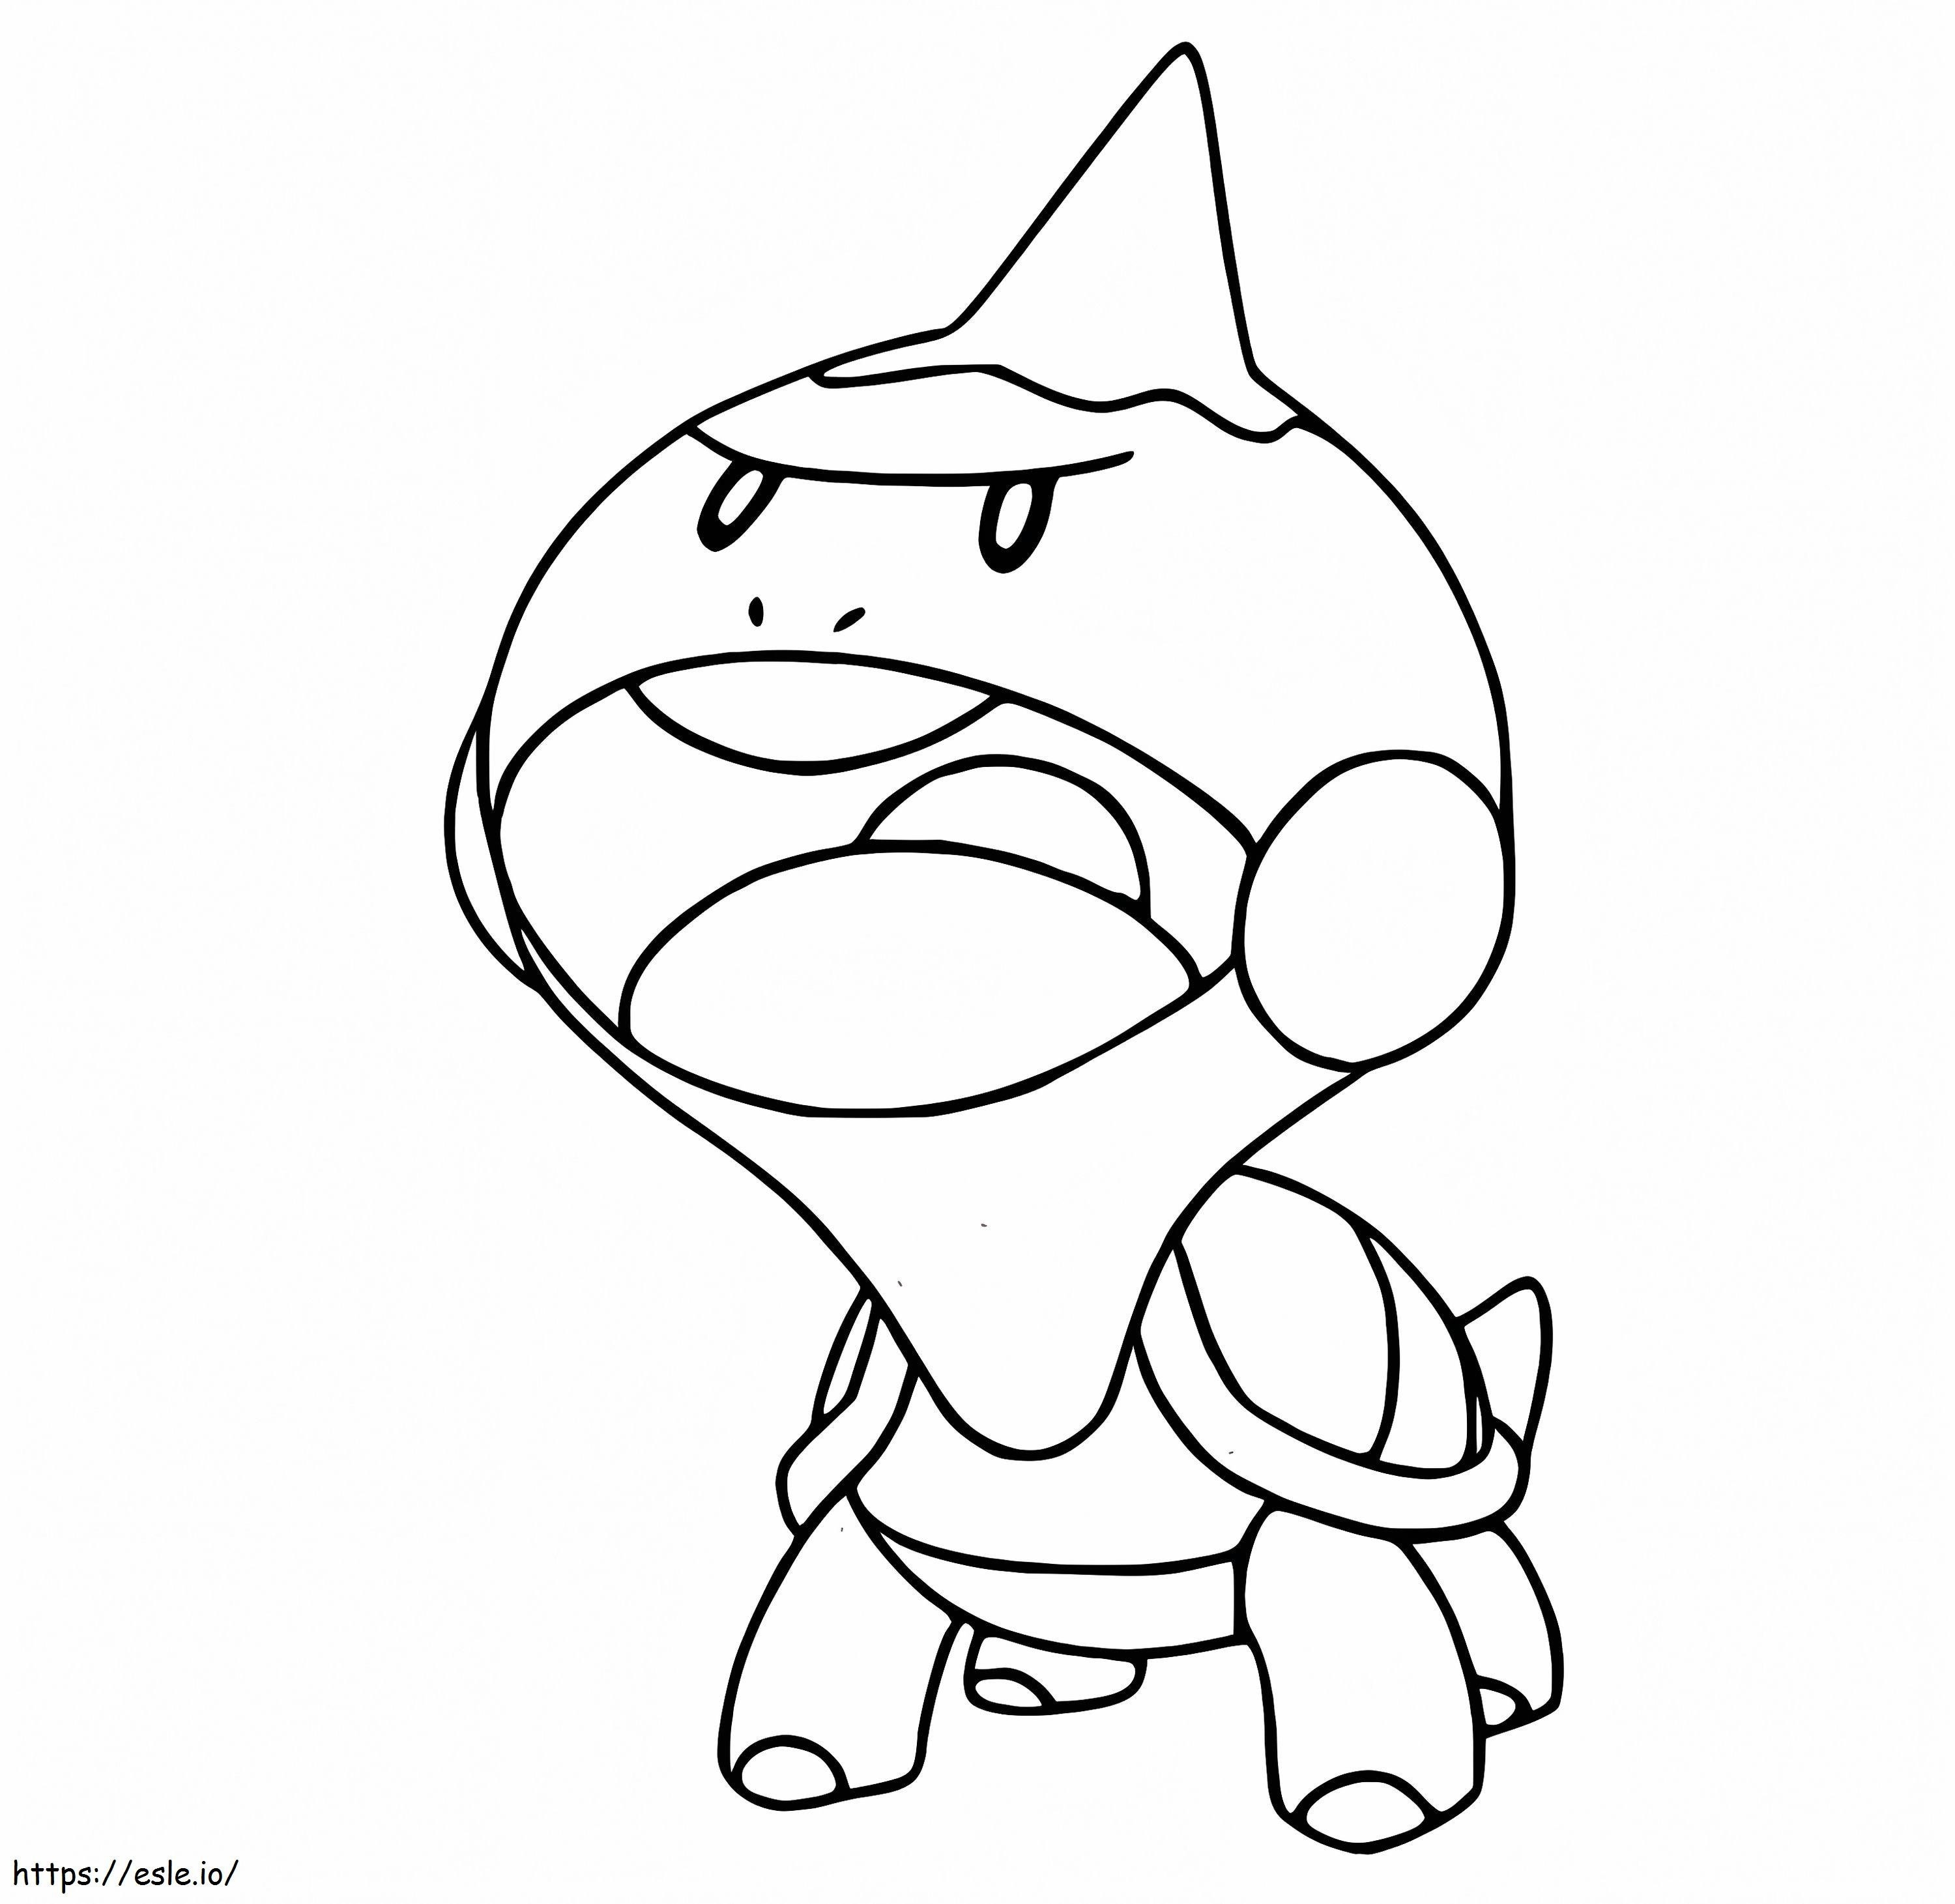 Chewtle Pokemon coloring page